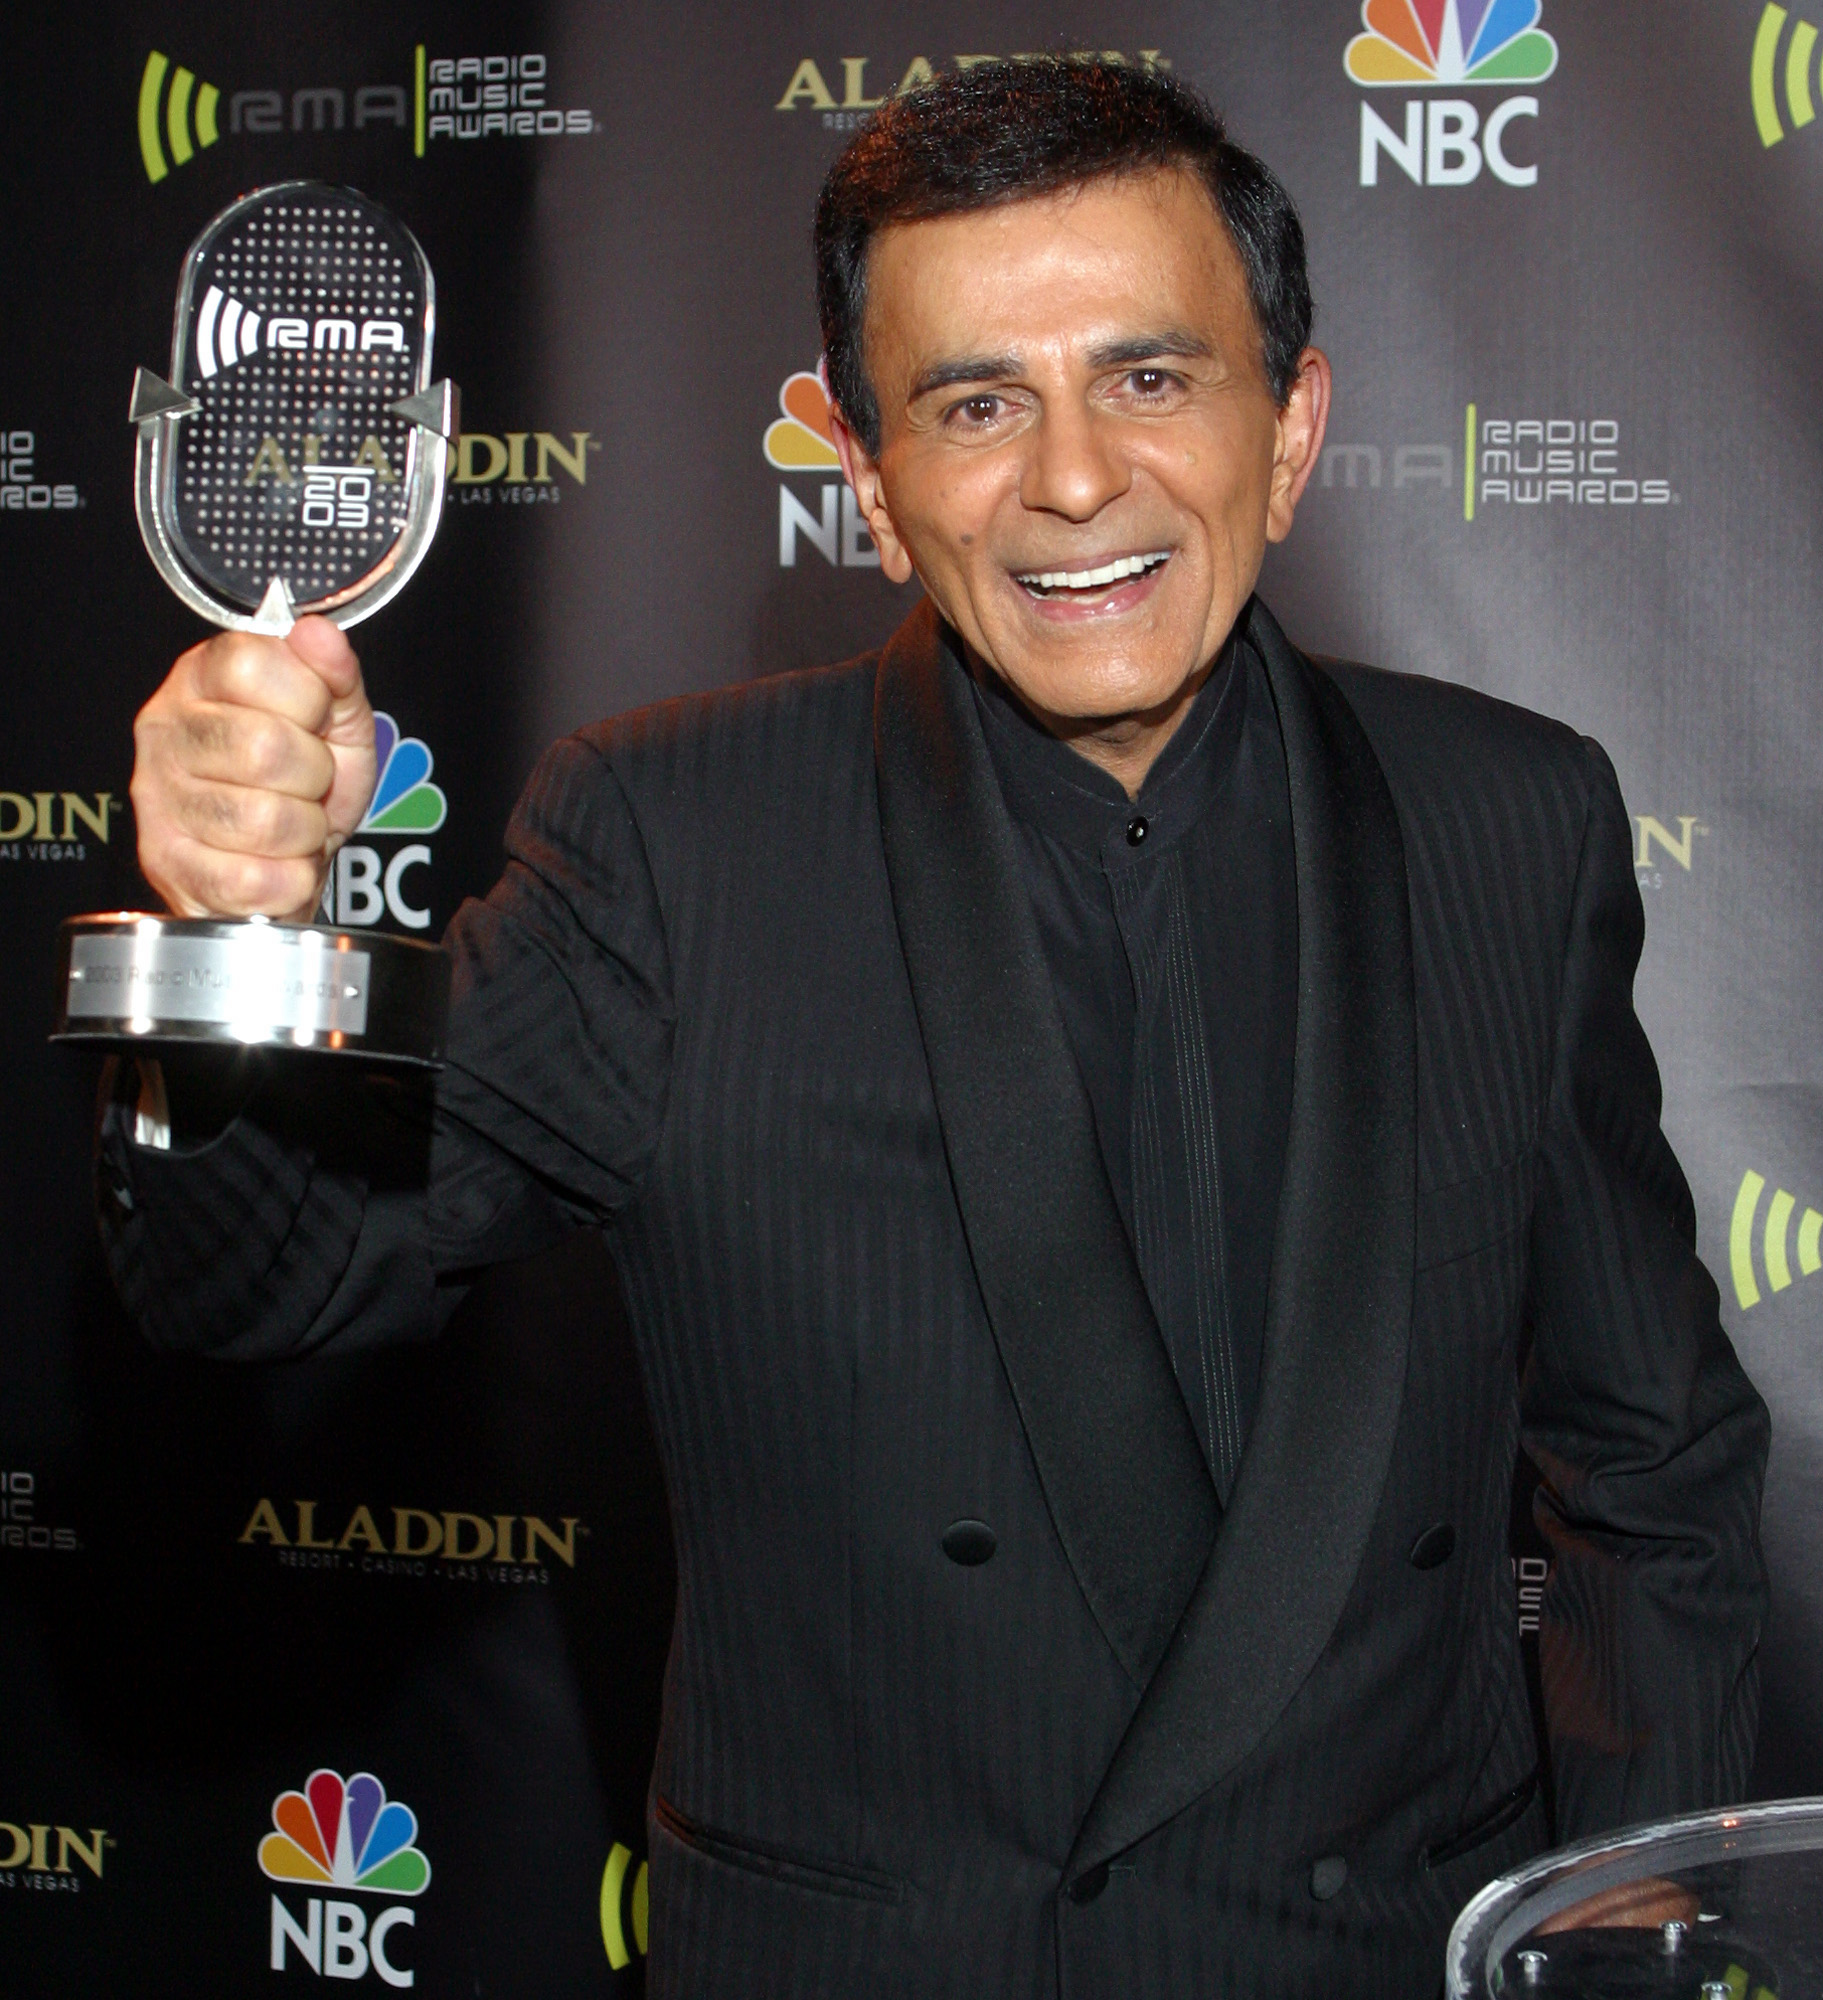 Casey Kasem poses for photographers after receiving the Radio Icon award during The 2003 Radio Music Awards at the Aladdin Resort and Casino in Las Vegas on Oct. 27